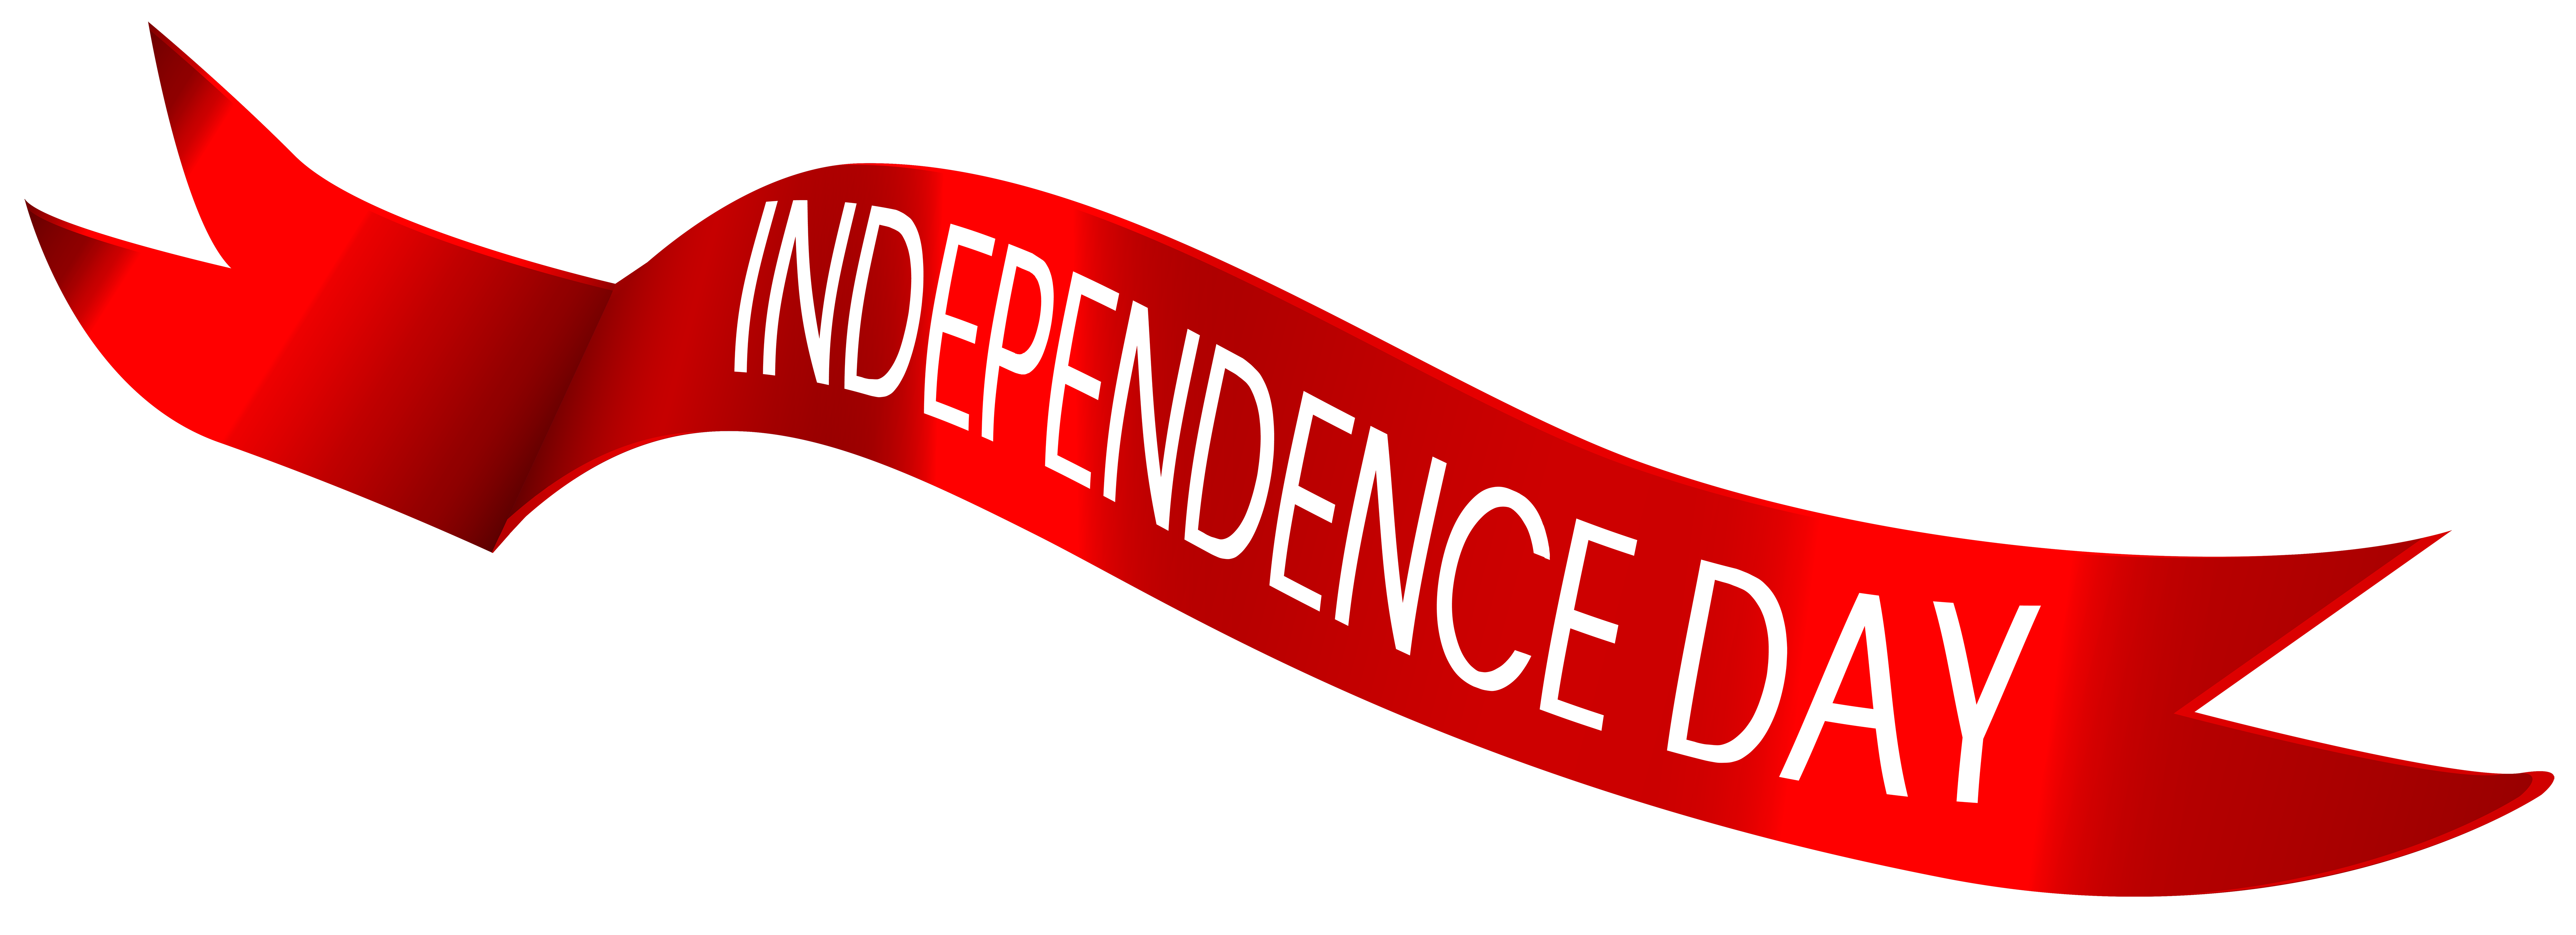 clipart on independence day - photo #36